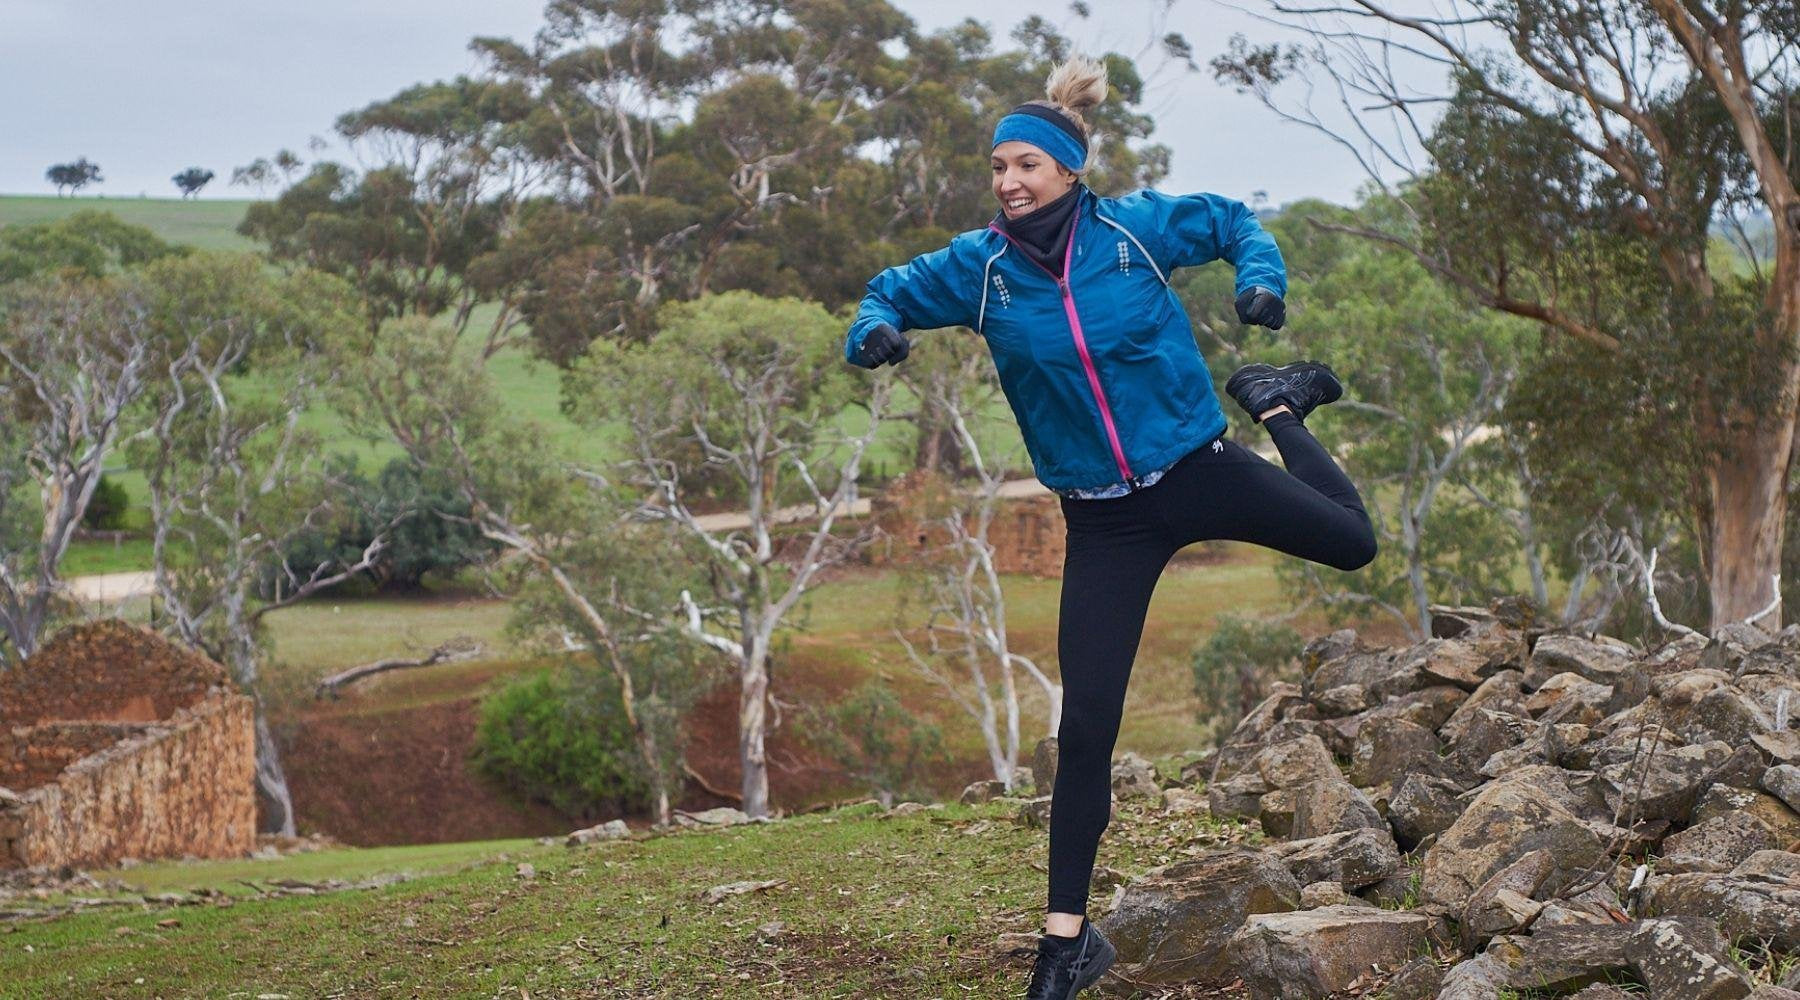 lady jumping off rocks with leg bent in the air with a big smile, wearing polartec neck warmer and reversible winter headband.